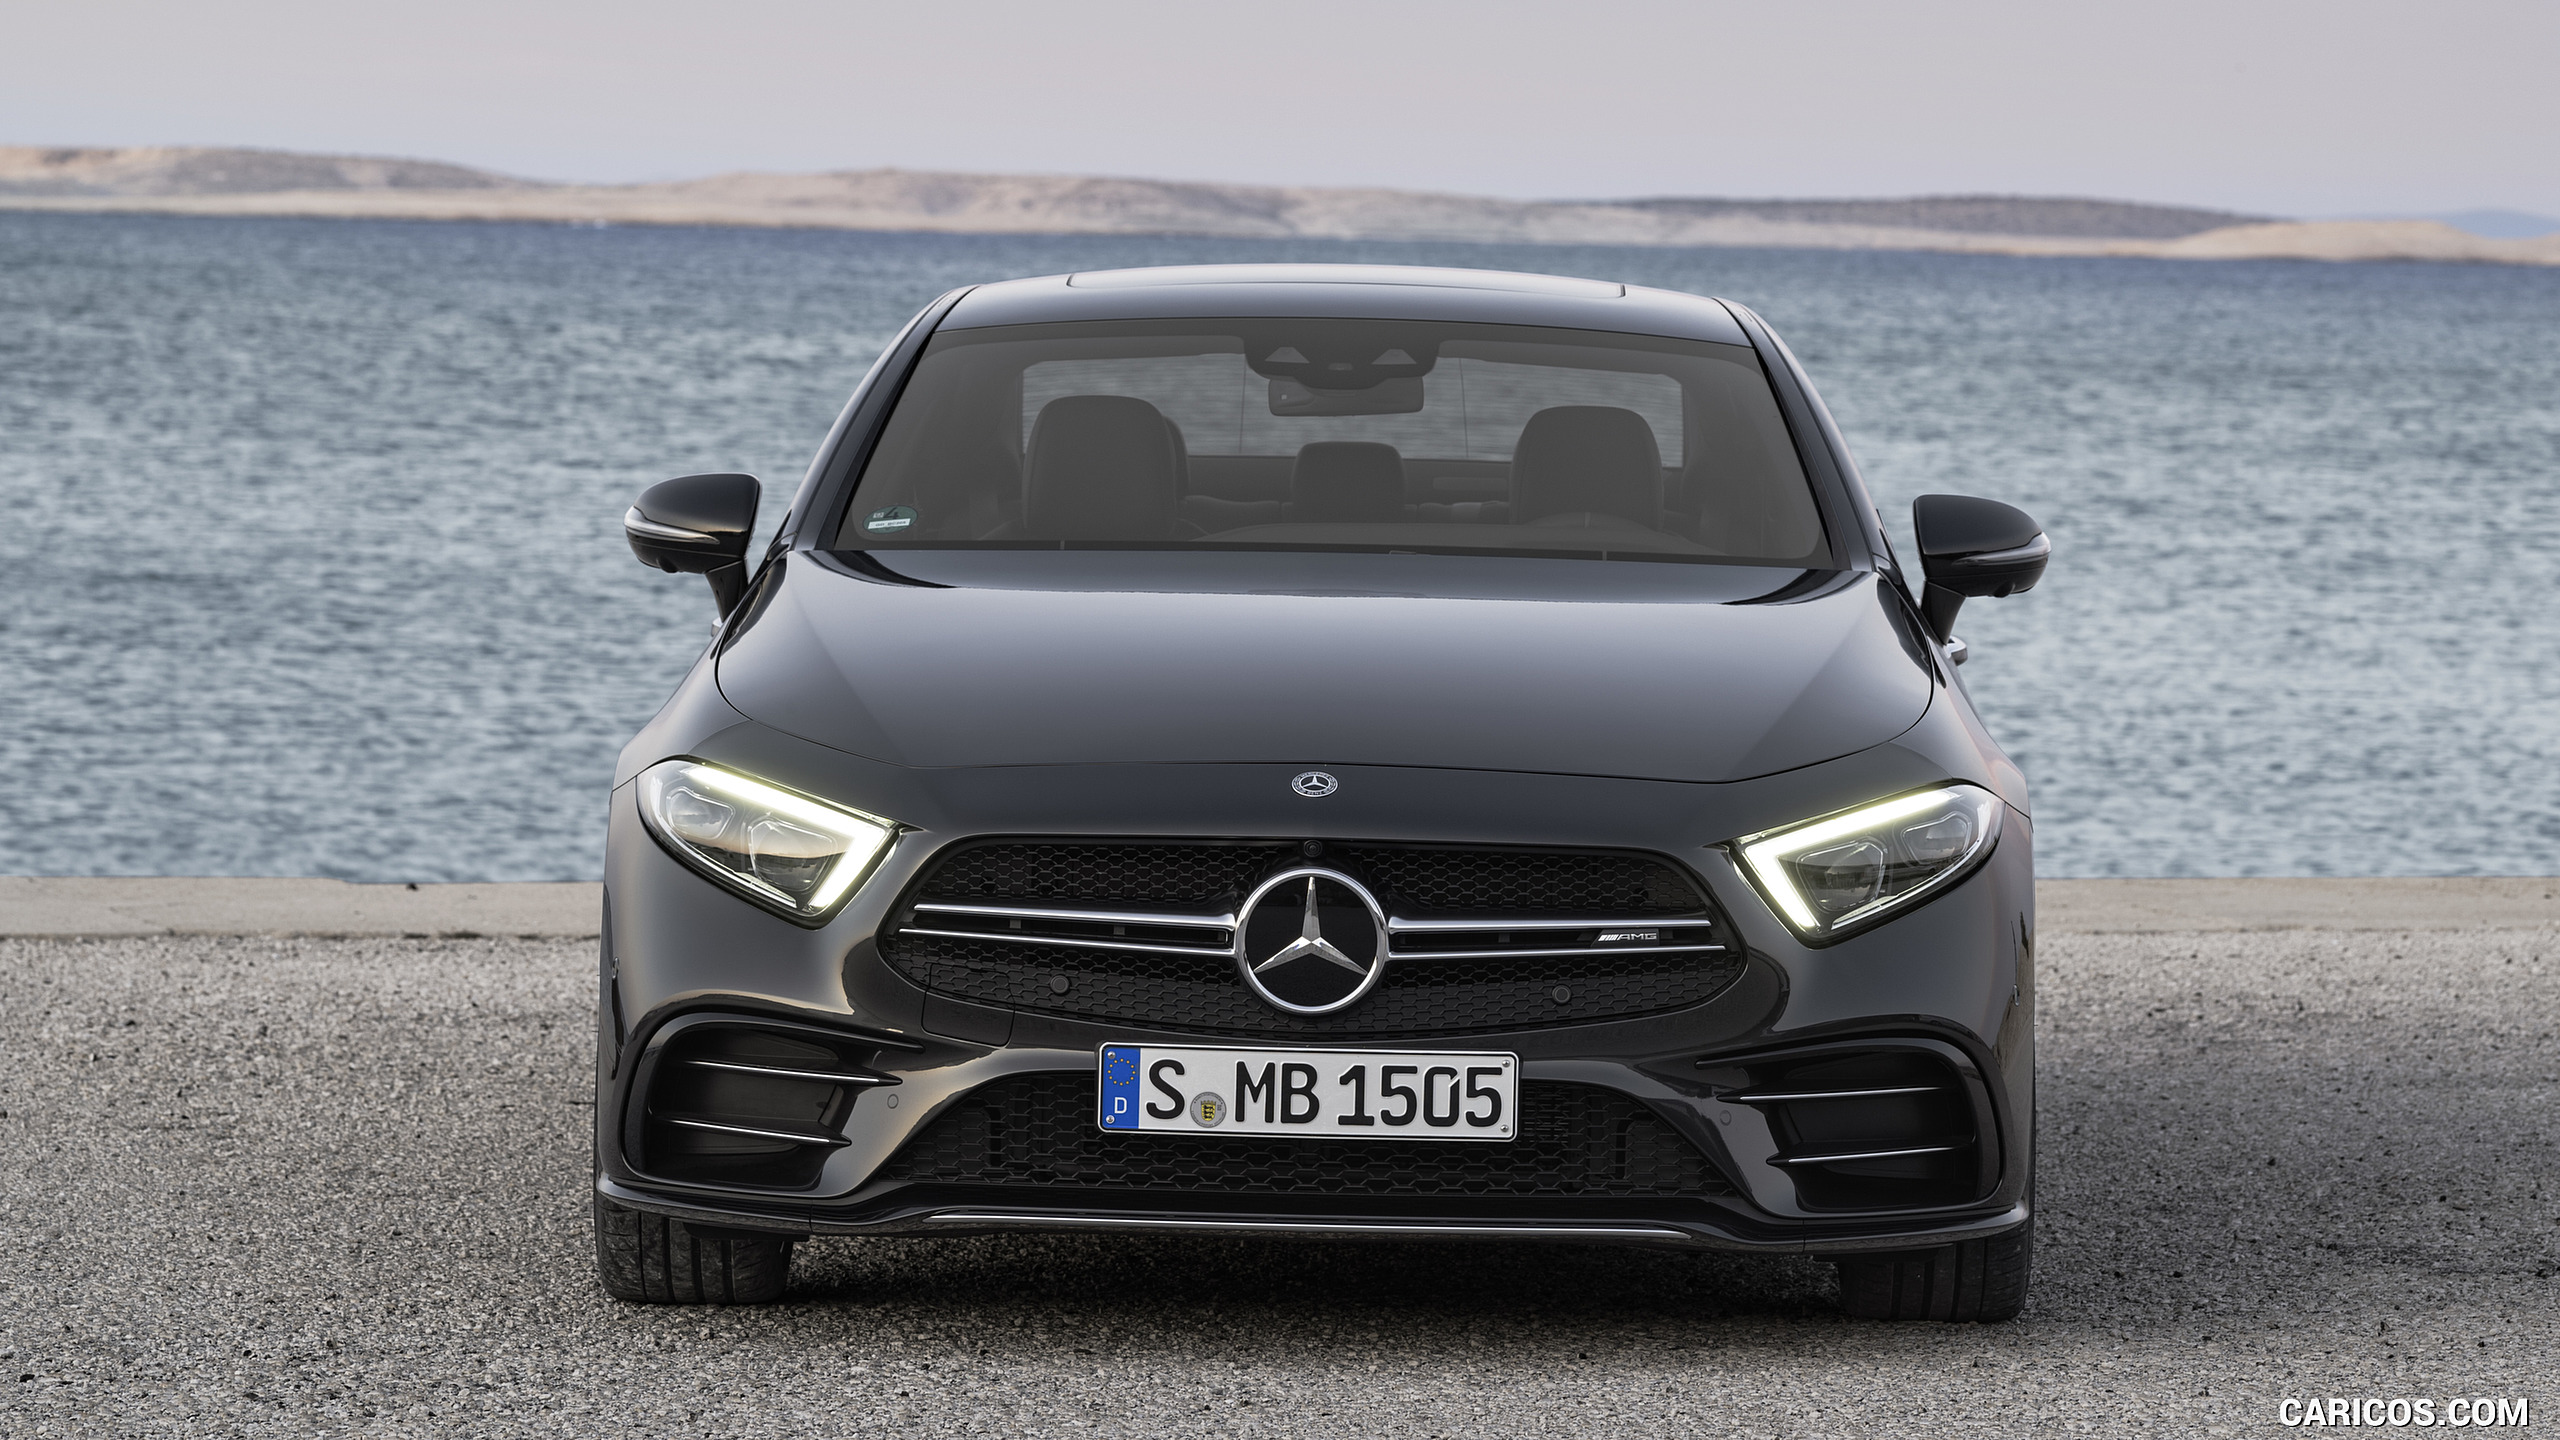 2019 Mercedes-AMG CLS 53 4MATIC+ - Front, #8 of 84